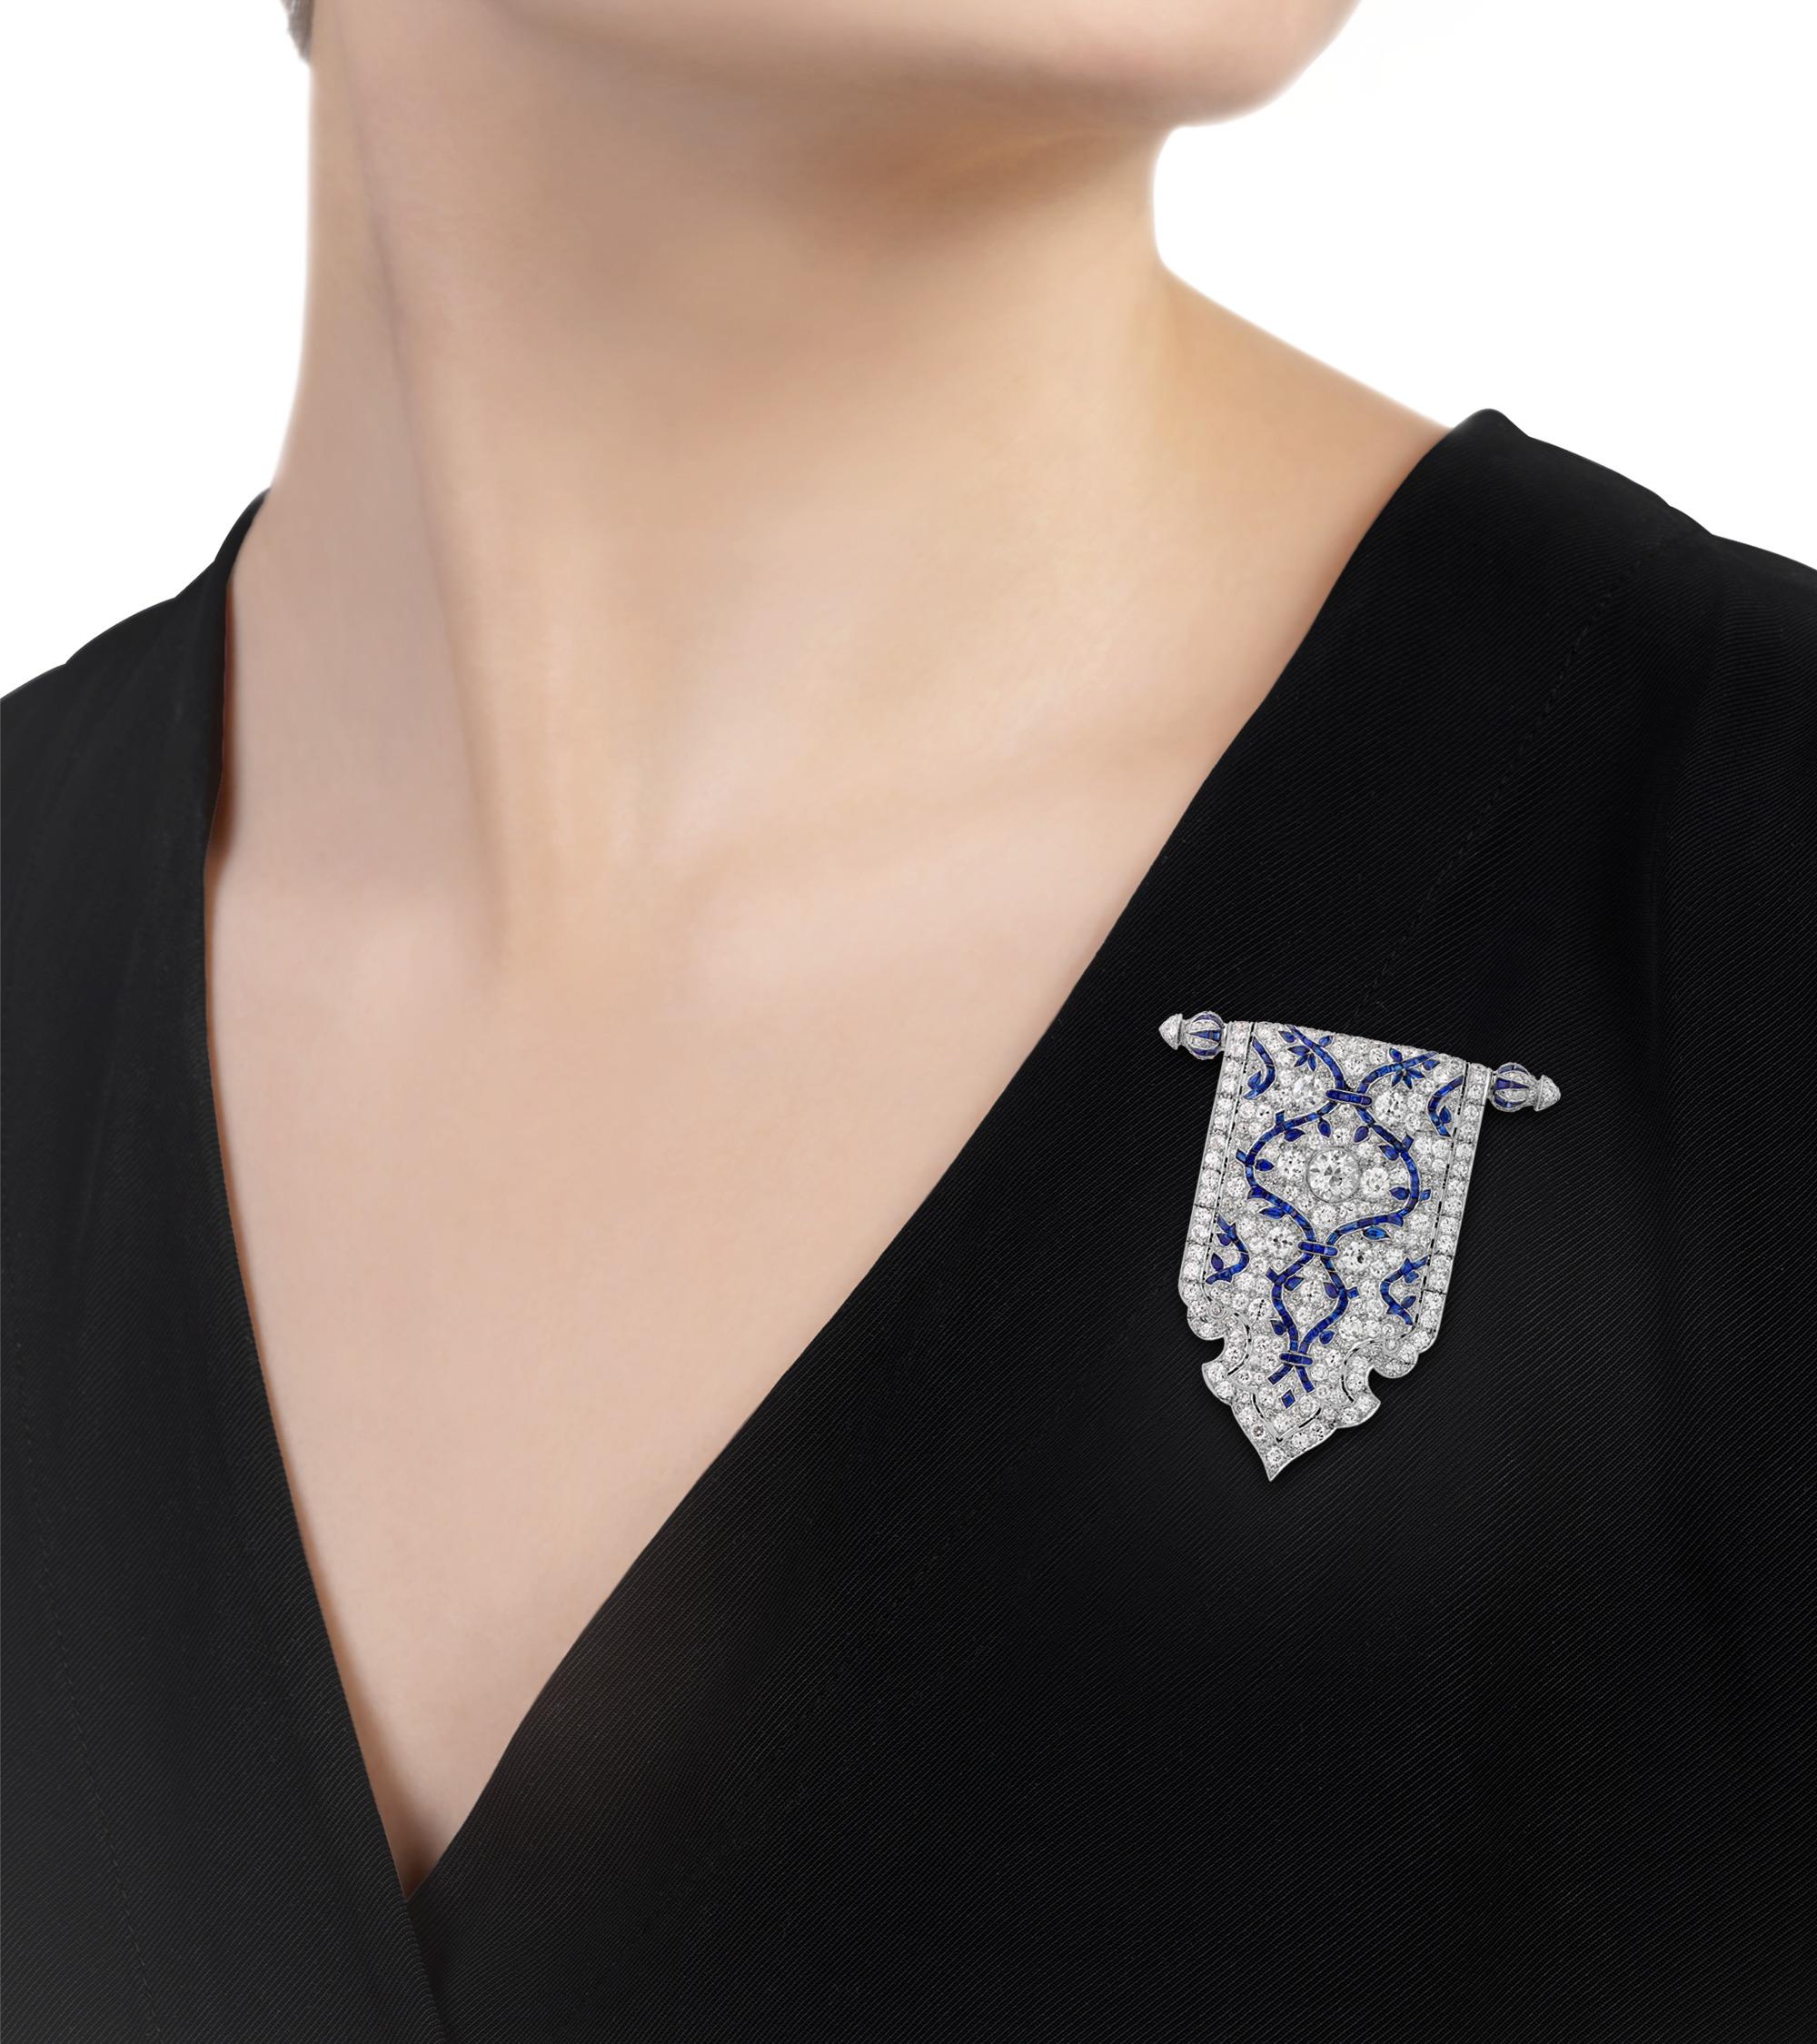 Exuding the glamour of a bygone era, this exceptional Art Deco brooch features expertly set white diamonds and sapphires. The royal blue gems line delicate foliate motifs across the pin, while the large central diamond, weighing approximately 0.75